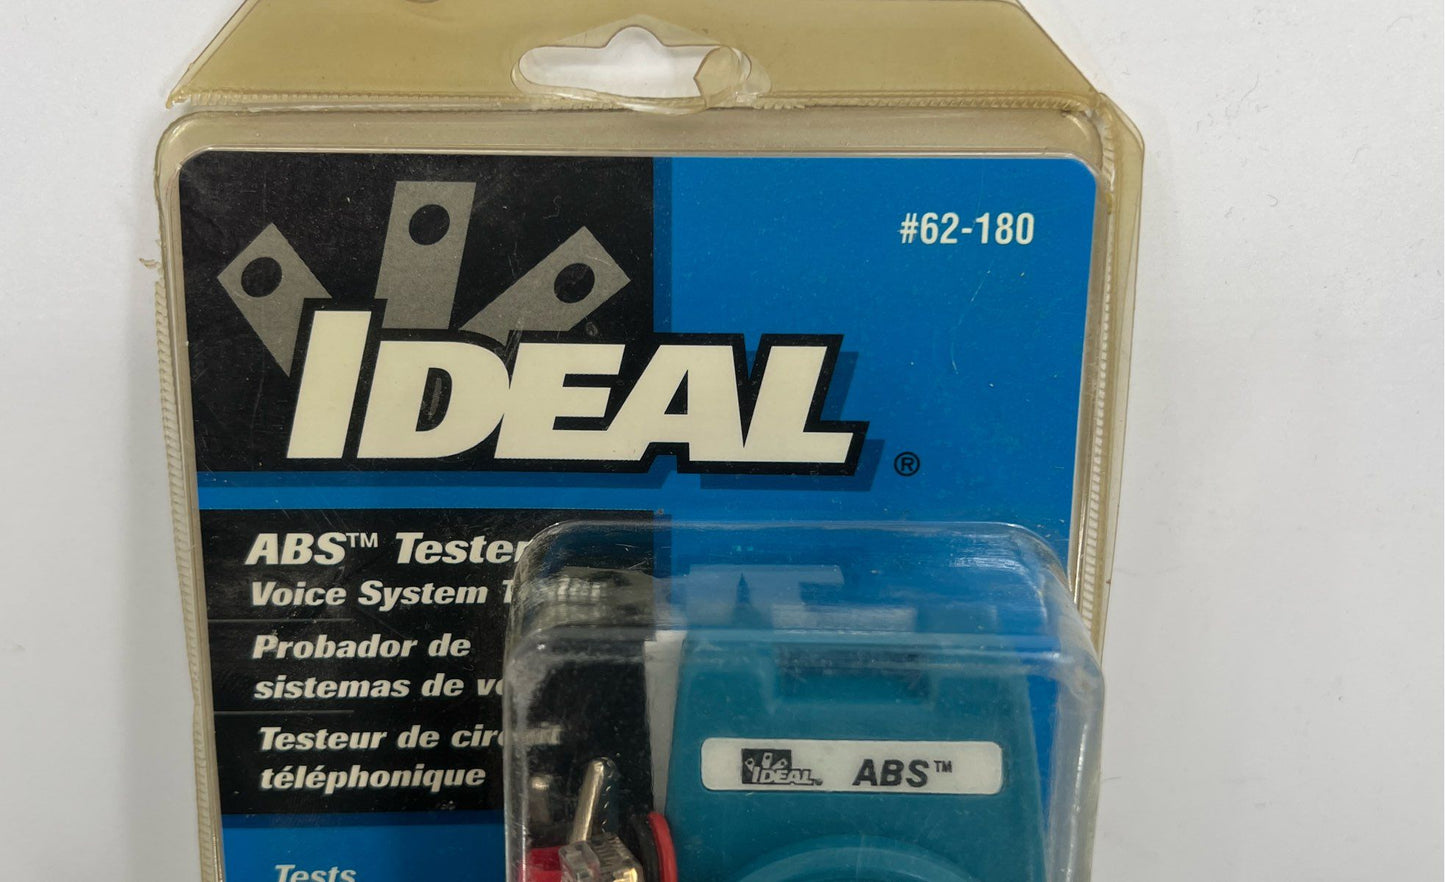 New Ideal ABS Tester-Voice System Tester #62-180 Dial Tone Tester-Made In USA